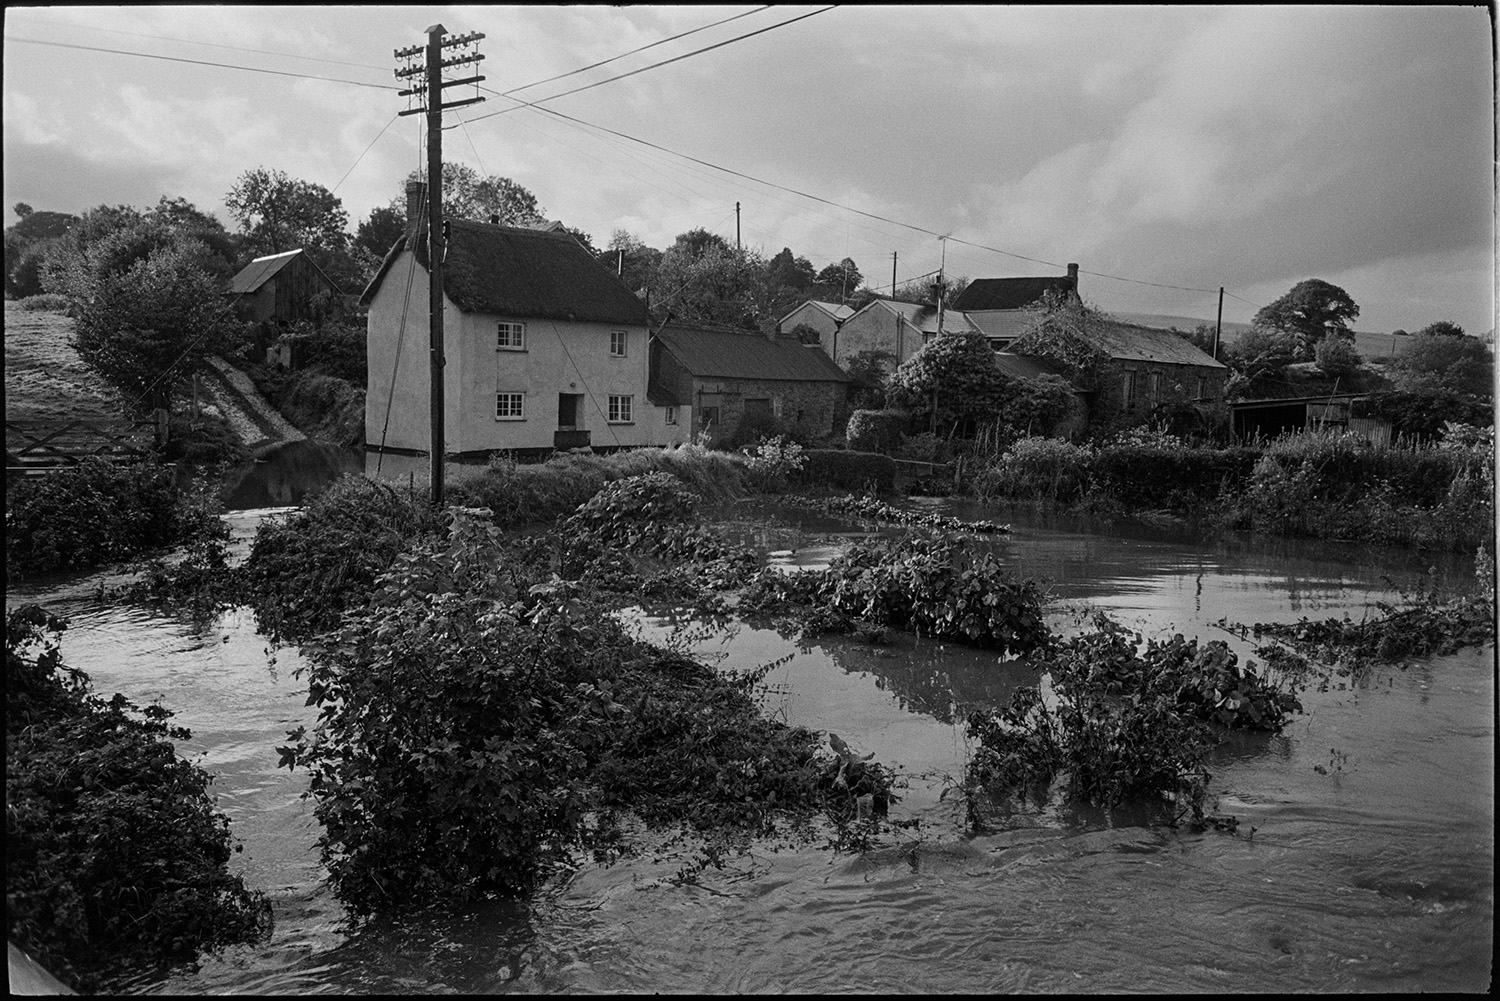 River in flood, marooned thatched cottage, iron gate in flooded field. 
[A thatched cottage cut off by flooding from the River Taw at Bridge Reeve, Ashreigney. Foliage washed down by the river can be seen floating in the flooded field in the foreground.]